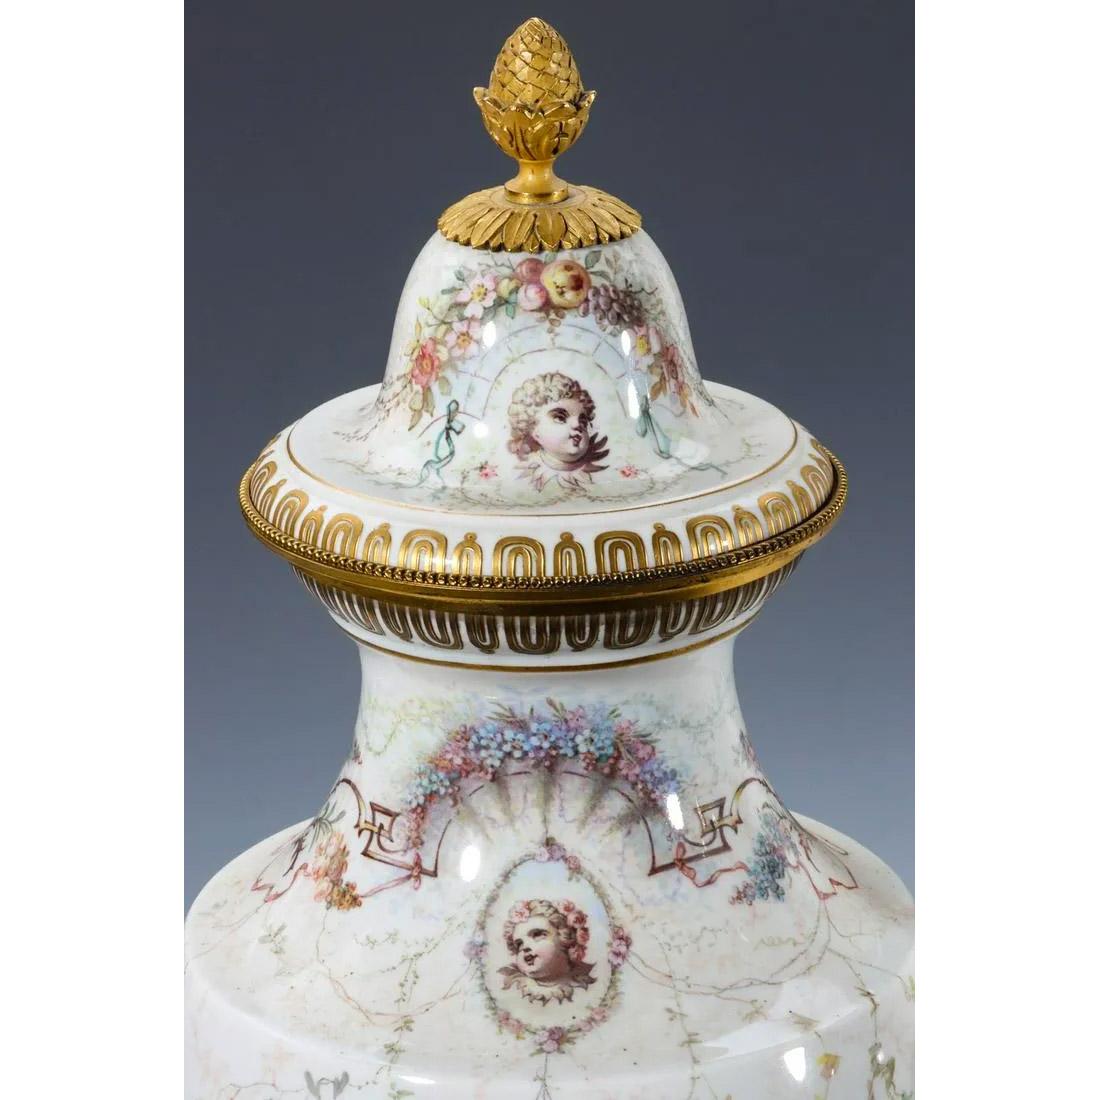 An exceptional pair of 19th century Sèvres style covered Urns finely decorated with continuous scenes of classical maidens and putti in detailed landscapes, each signed ‘M. Demonceaux.’

Artist: Marie Demonceaux (French, 1850-1899)
Date: 19th